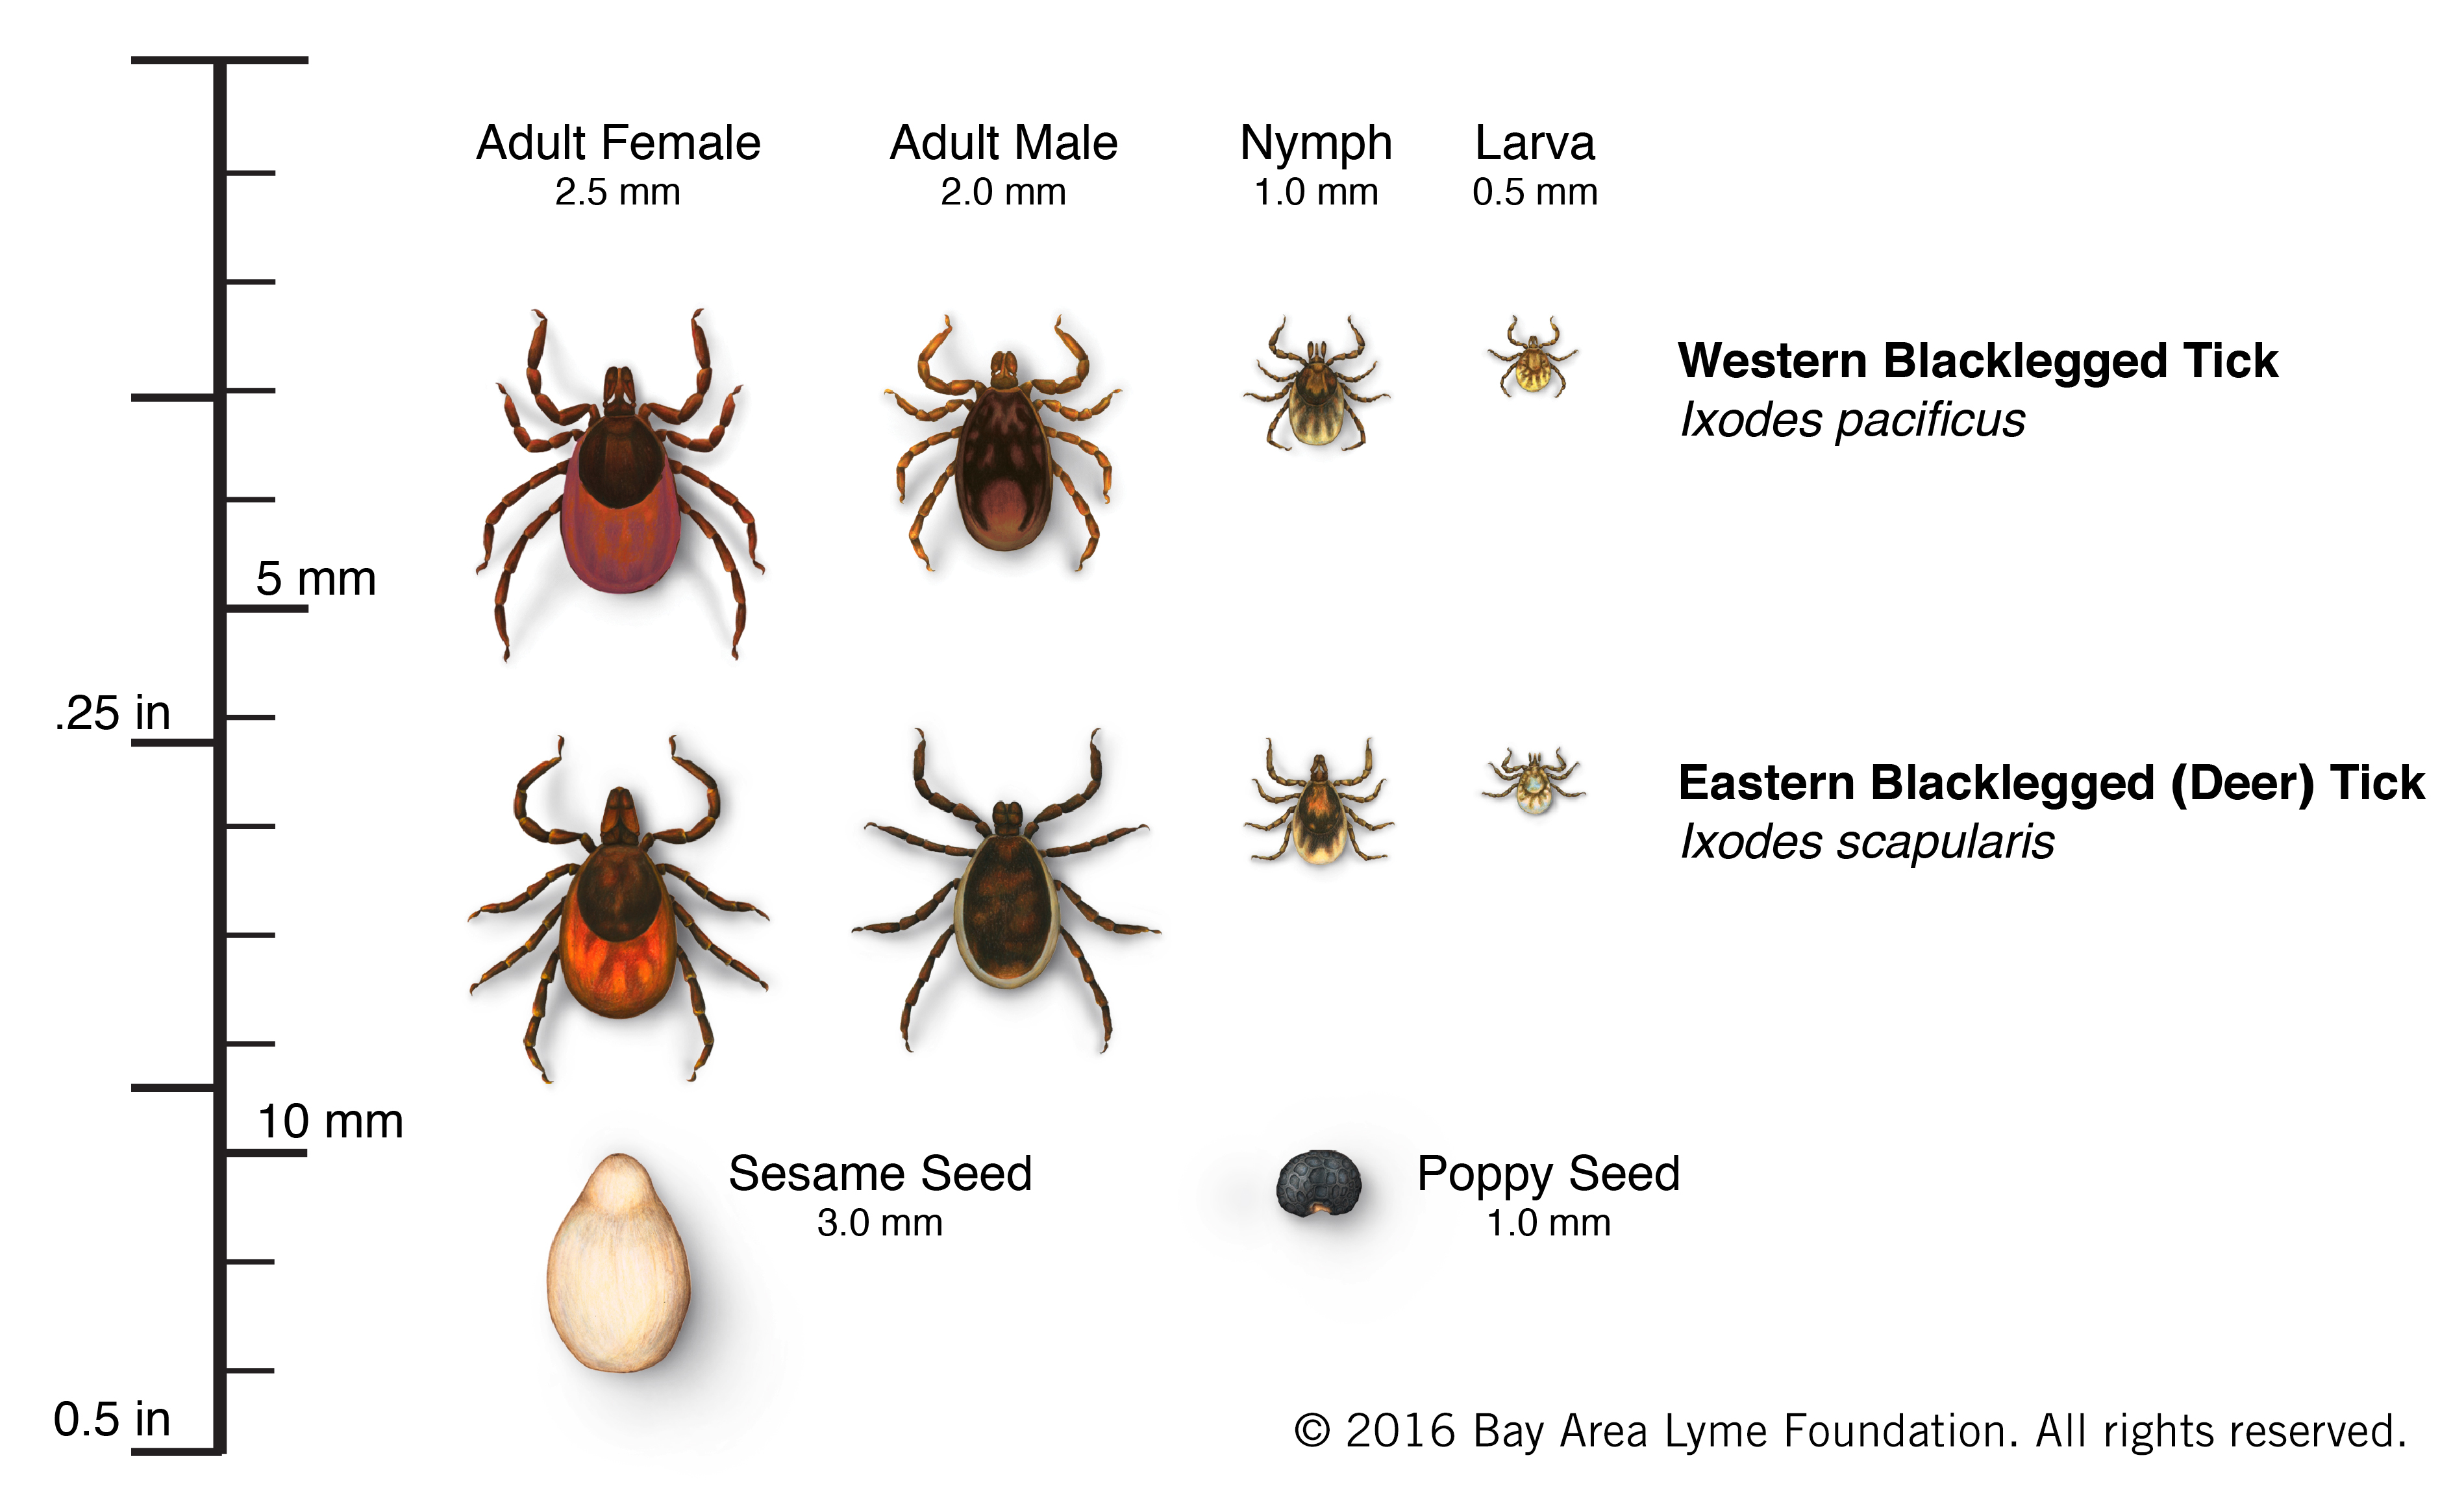 table outlining the various types and sizes of blacklegged ticks.